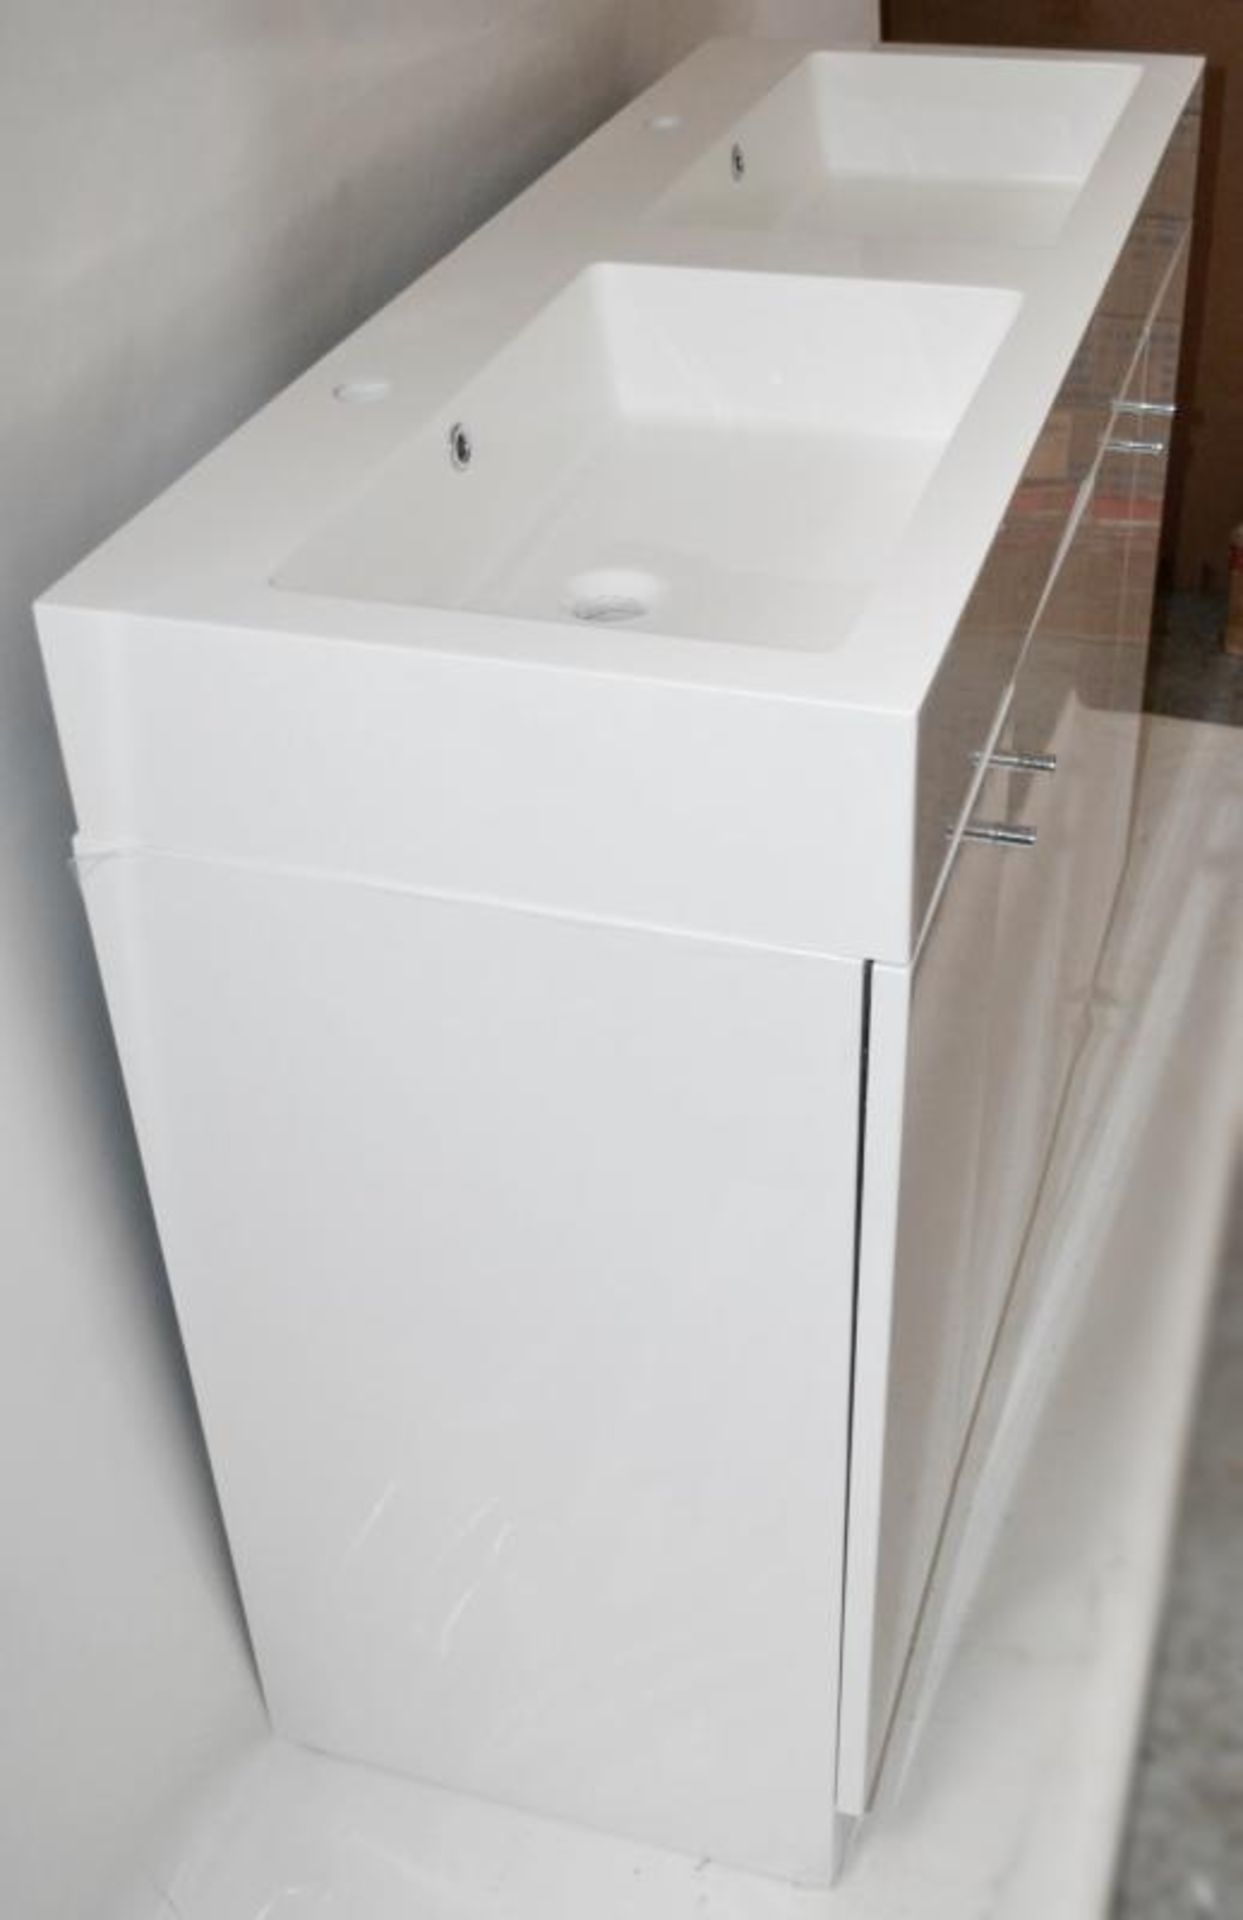 1 x Gloss White 1200mm 4-Door Double Basin Freestanding Bathroom Cabinet - New & Boxed Stock - CL307 - Image 5 of 7